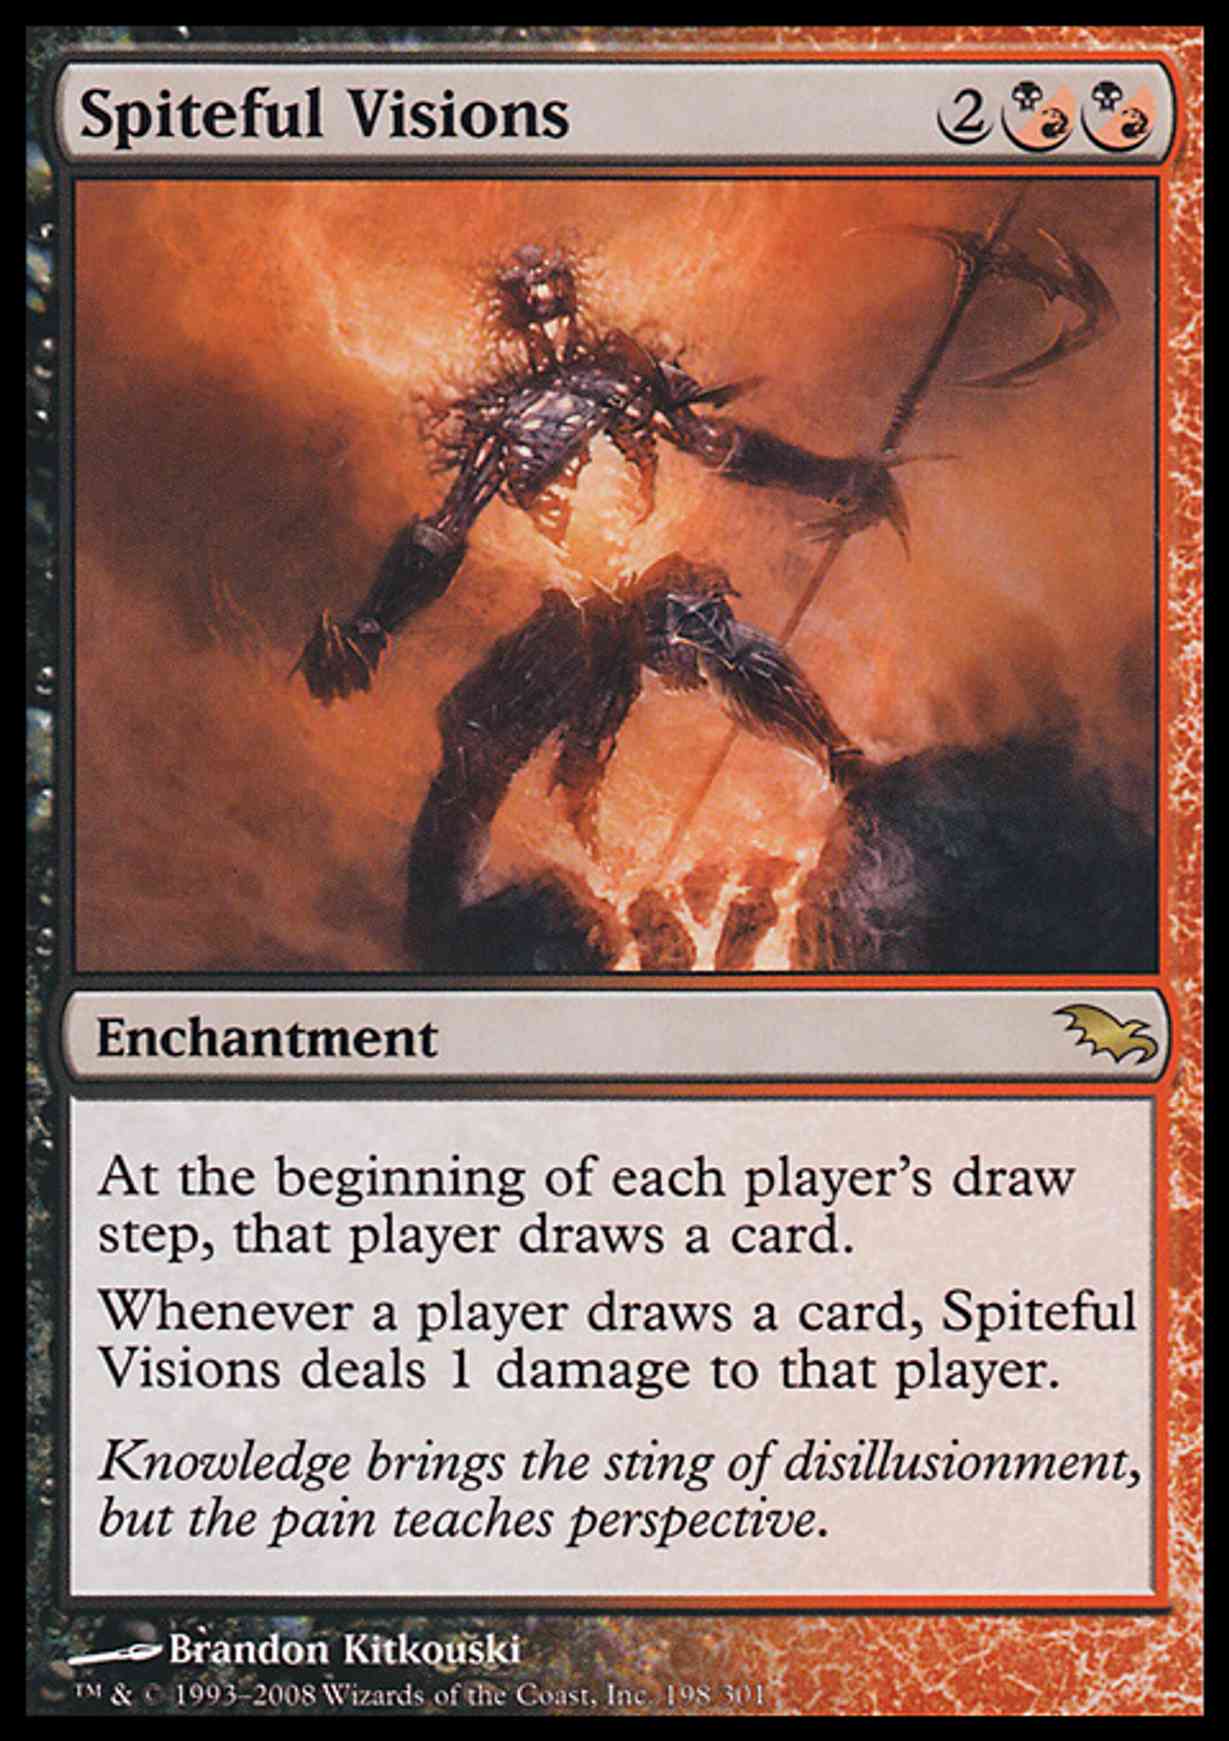 Spiteful Visions magic card front